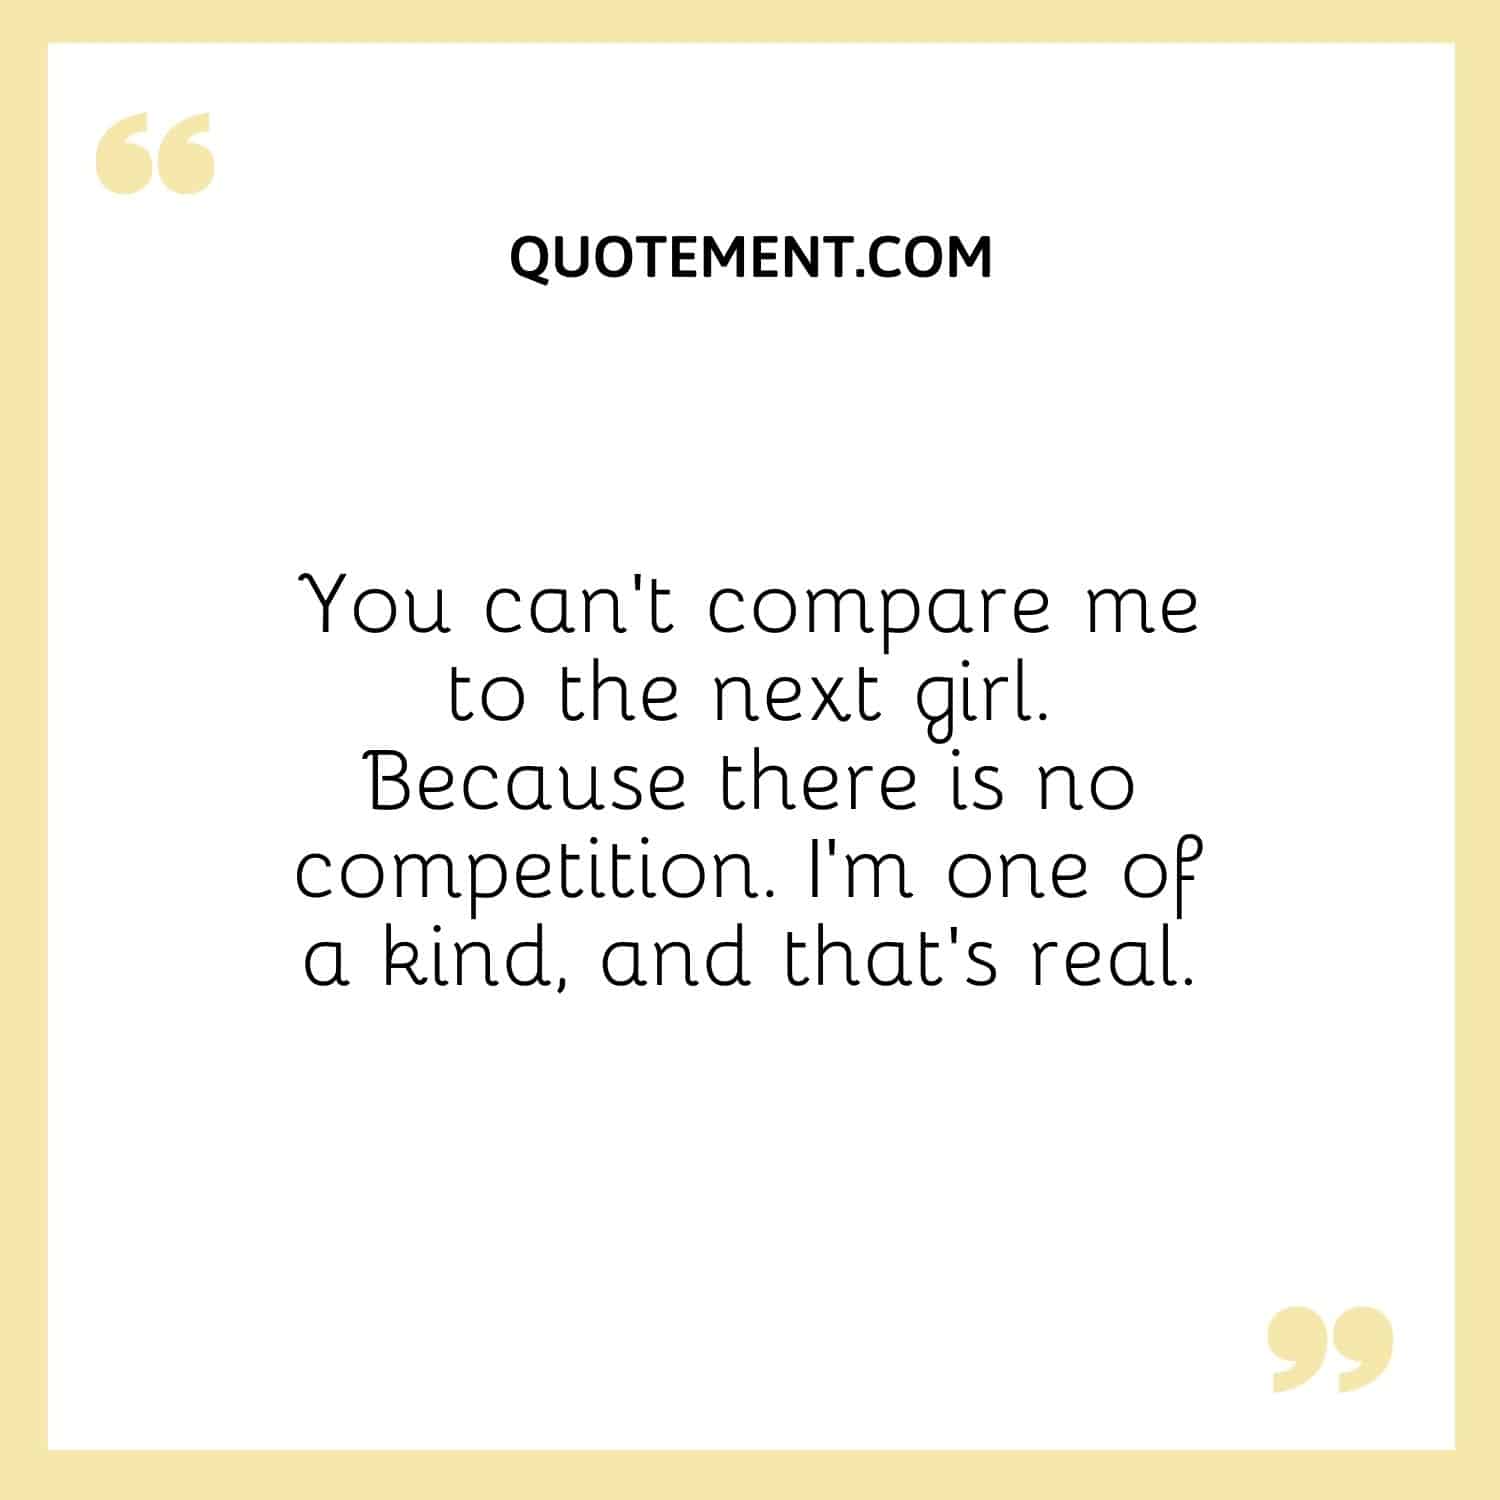 You can’t compare me to the next girl. Because there is no competition. I’m one of a kind, and that’s real.